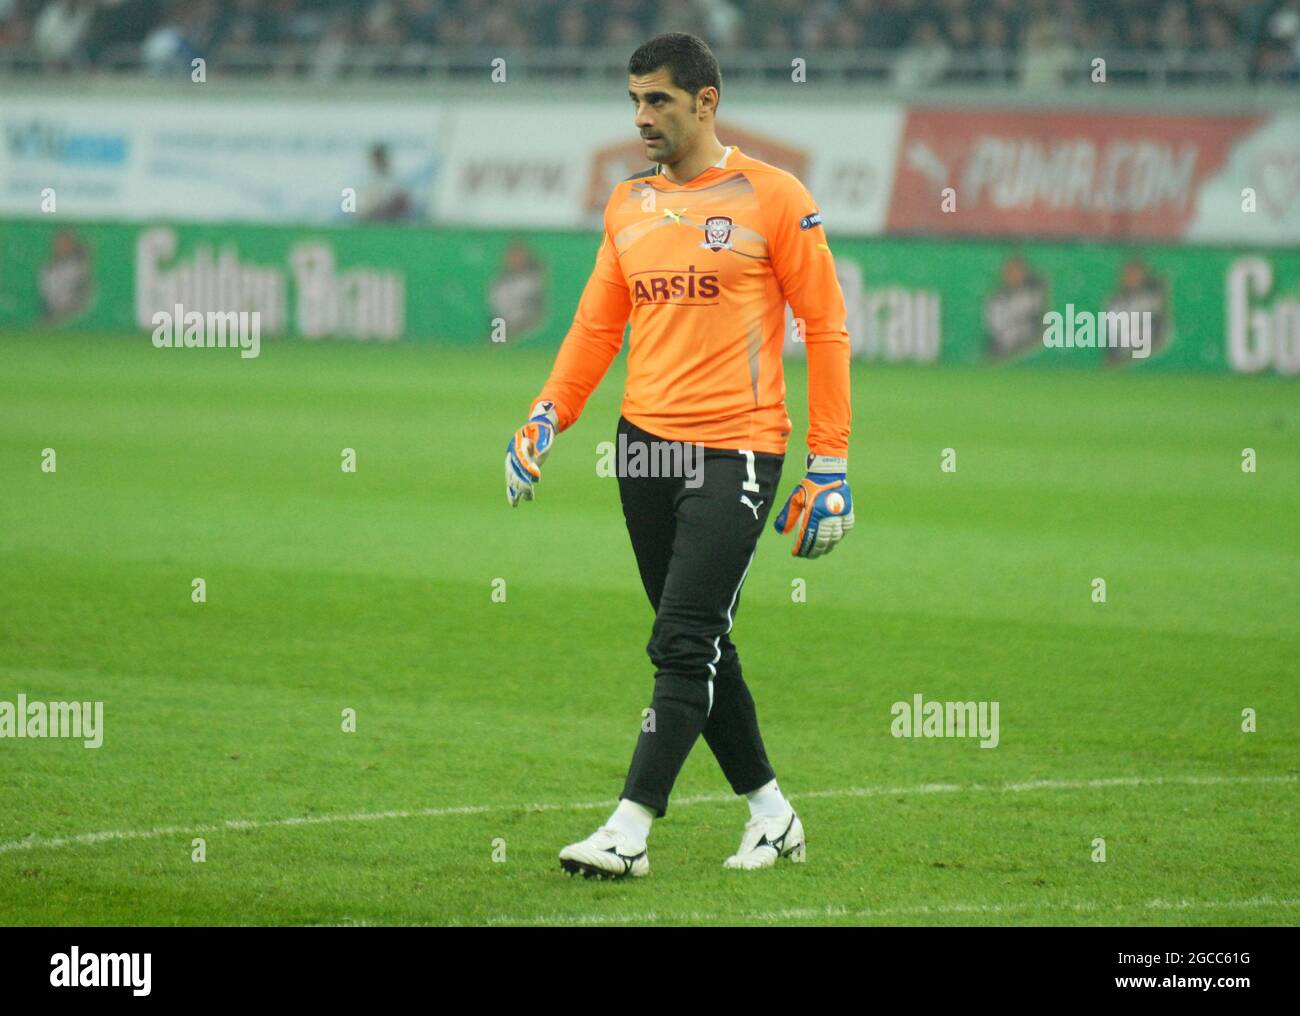 BUCHAREST, ROMANIA - OCTOBER 20, 2011: Daniel Coman of Rapid pictured during the UEFA Europa League Group C game between Rapid Bucuresti and Legia Warszawa at National Arena. Stock Photo